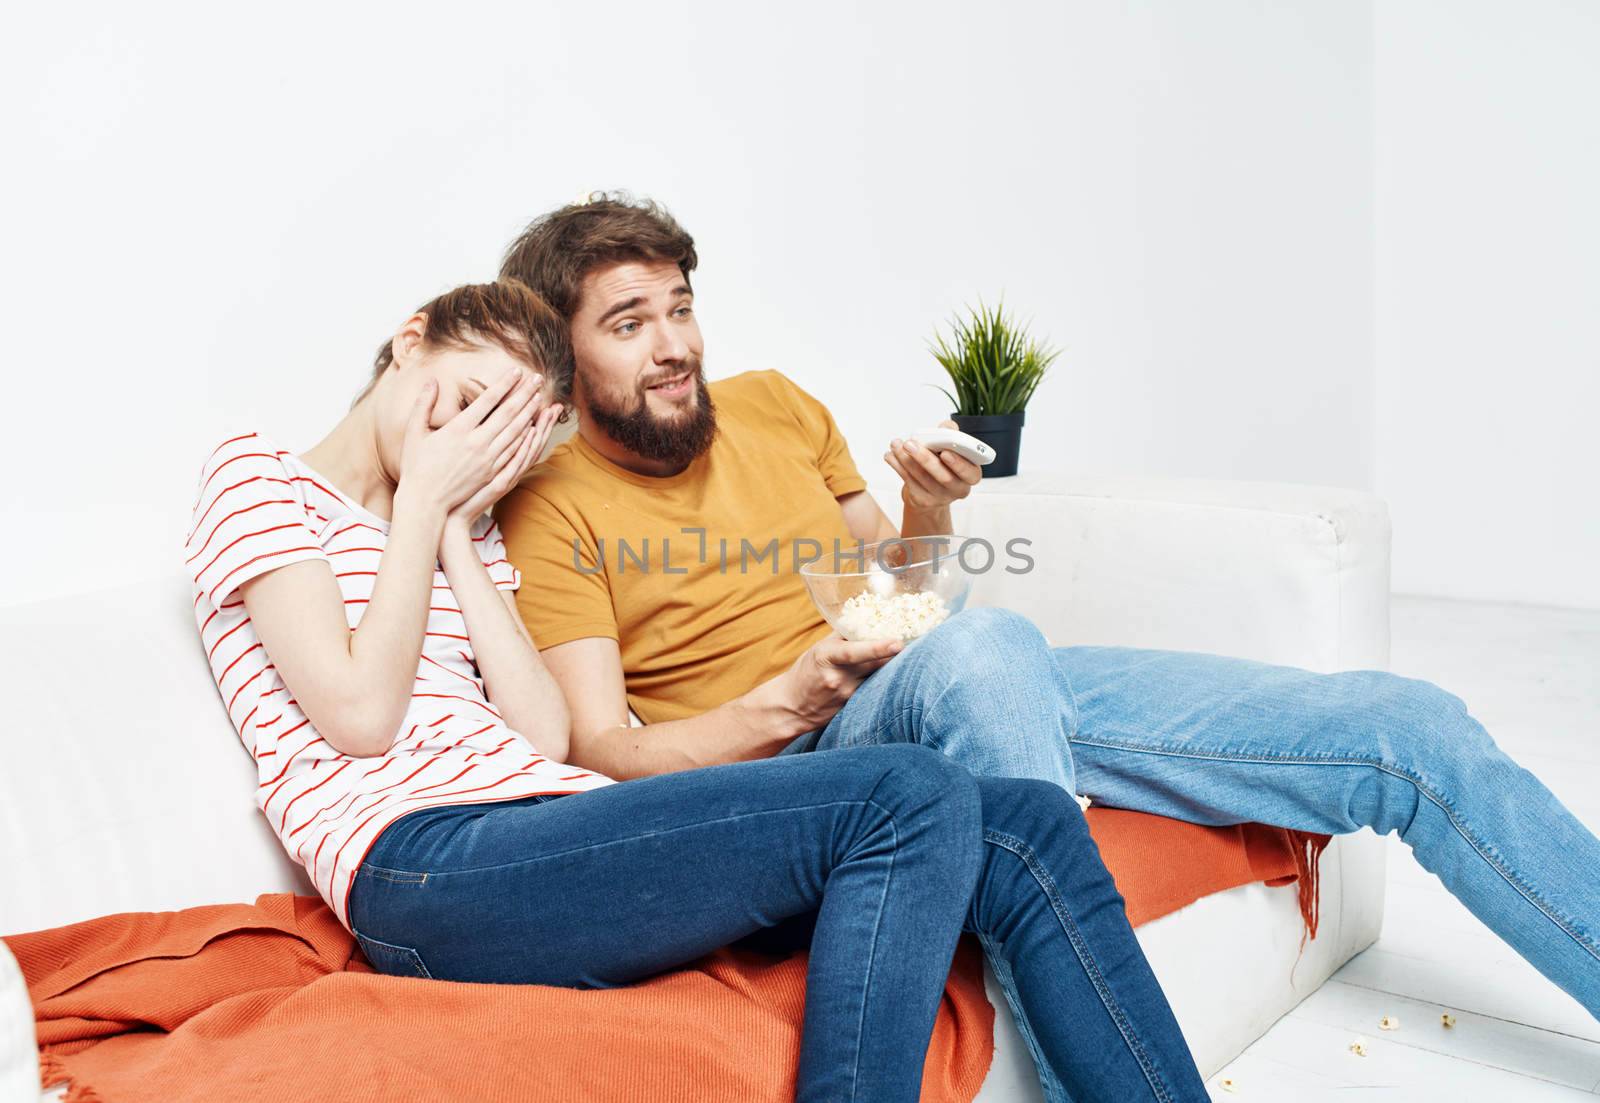 Man and woman watching movies indoors with popcorn and flower in a pot. High quality photo